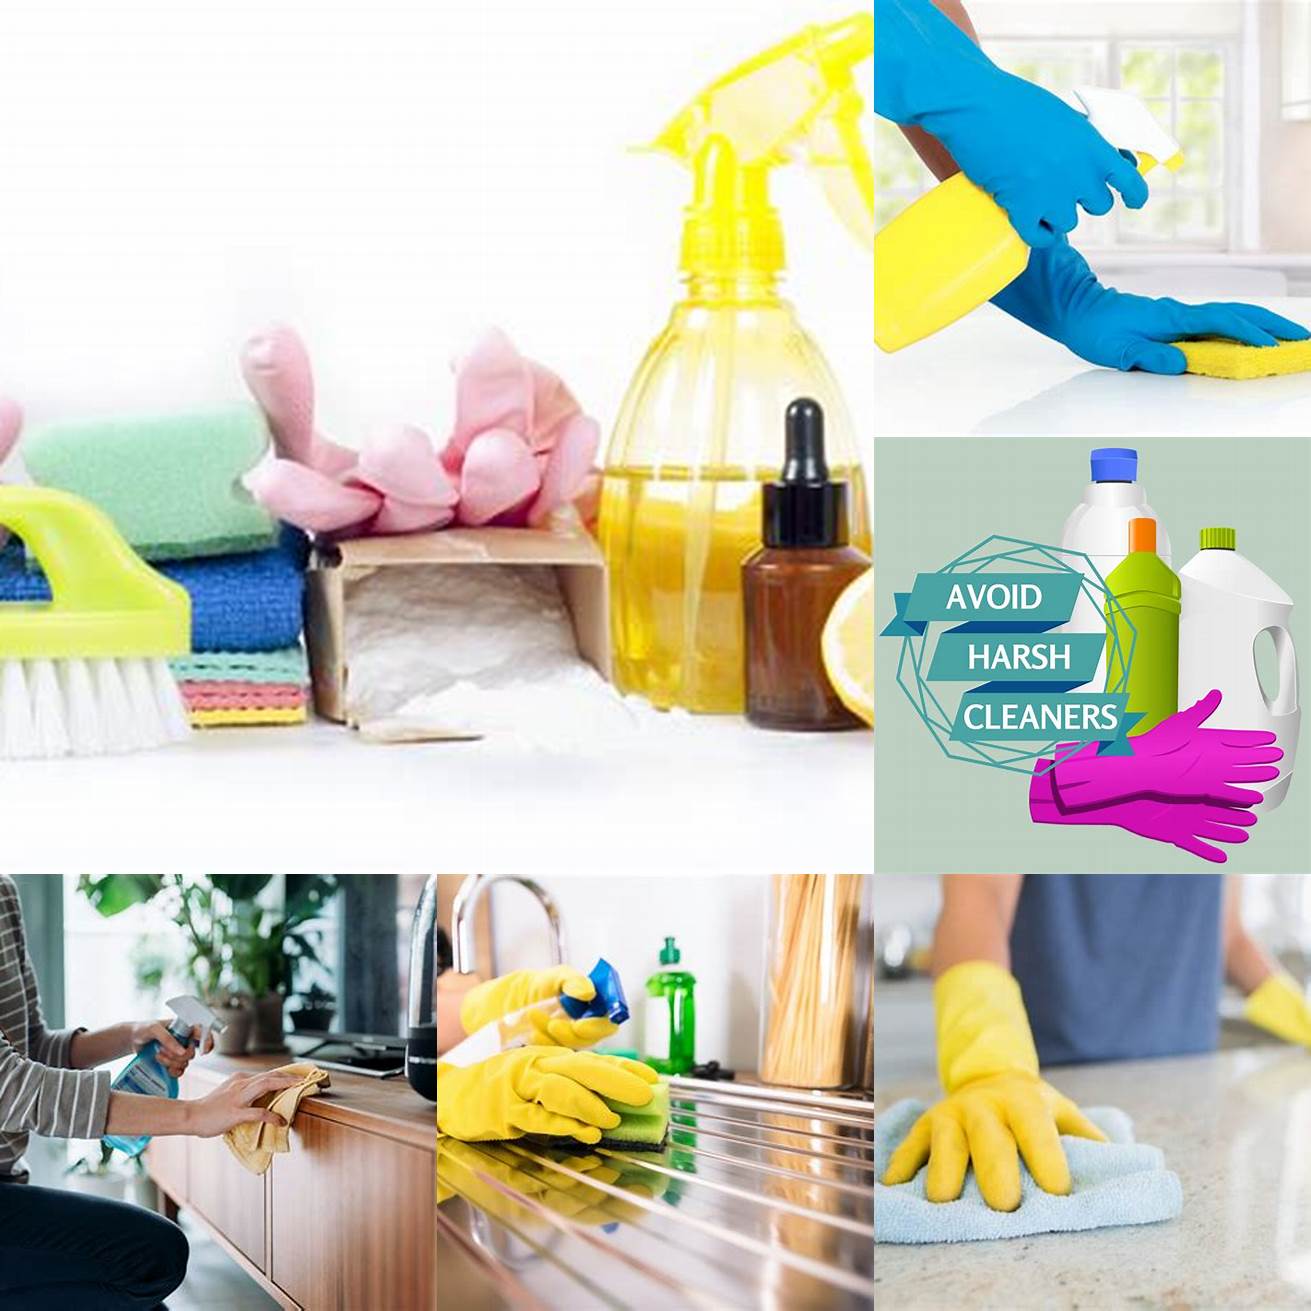 Avoid using harsh cleaners or abrasives on your furniture